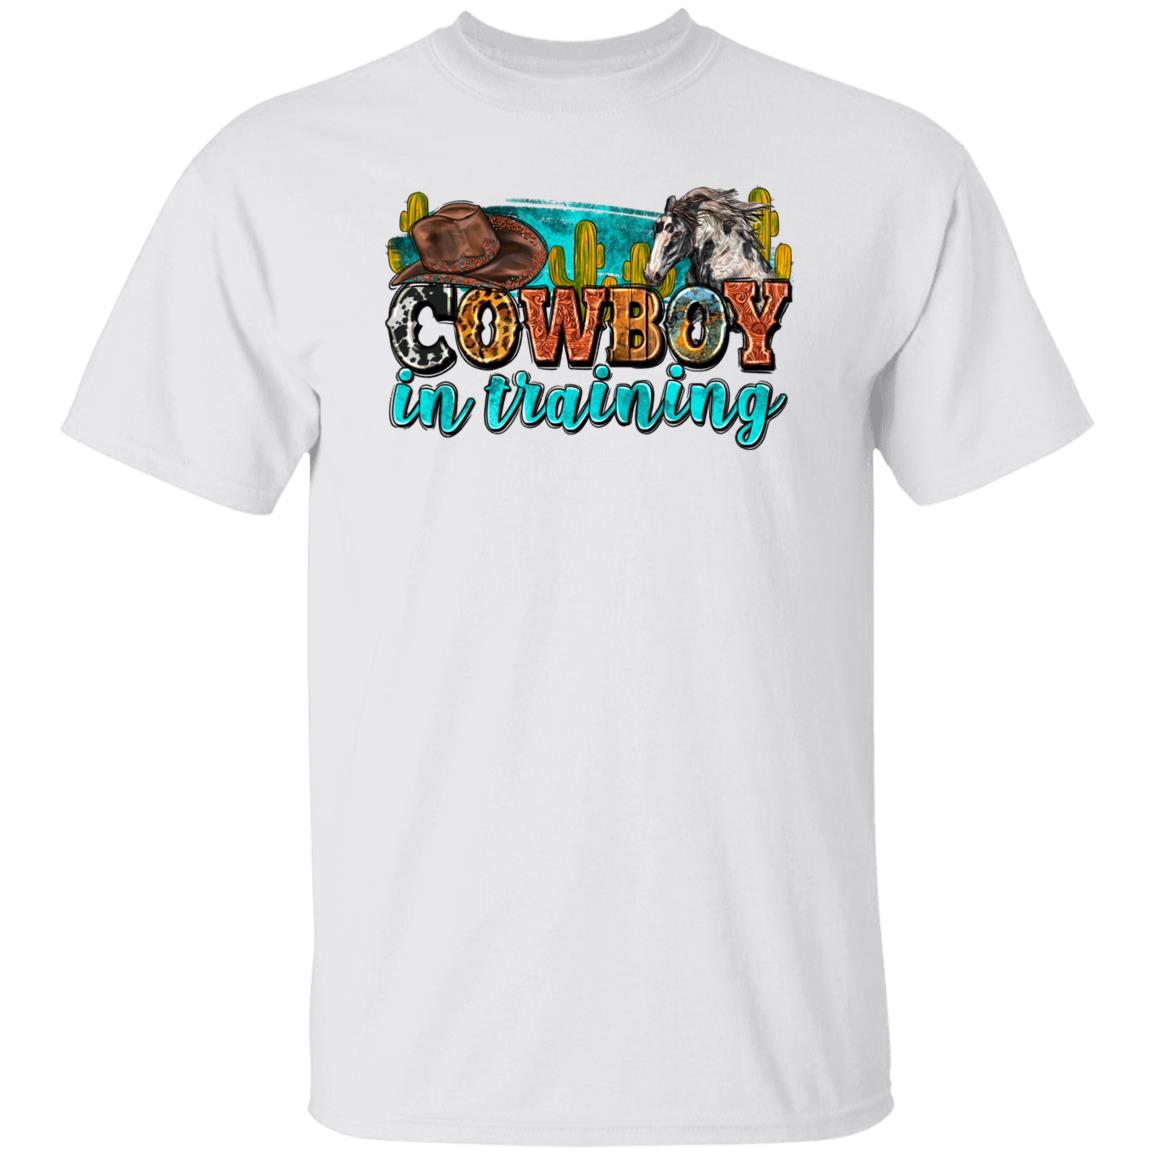 Cowboy in training T-Shirt Texas Western young cowboy Unisex tee White Sand Sport Grey-White-Family-Gift-Planet